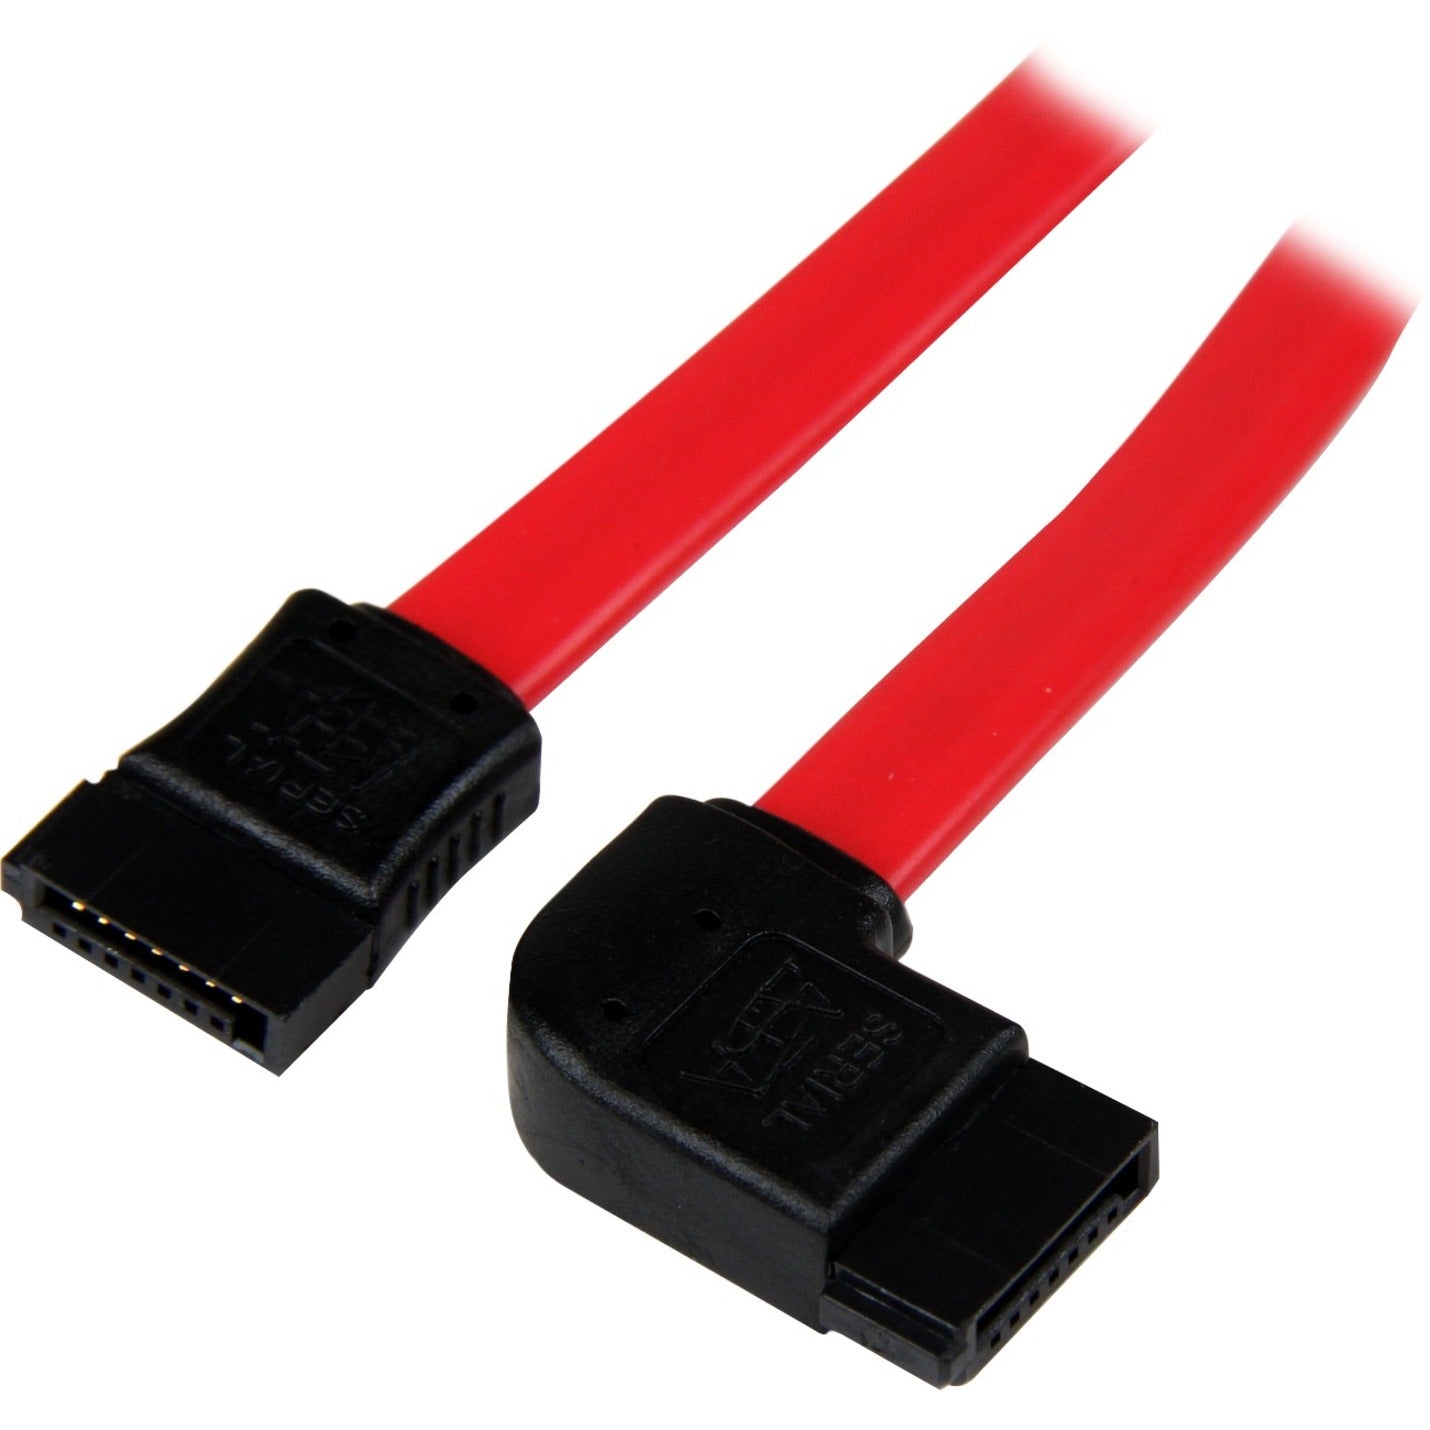 StarTech.com SATA18LSA1 18in SATA to Left Side Angle SATA Serial ATA Cable, Copper Conductor, 1.50 ft Length, Red